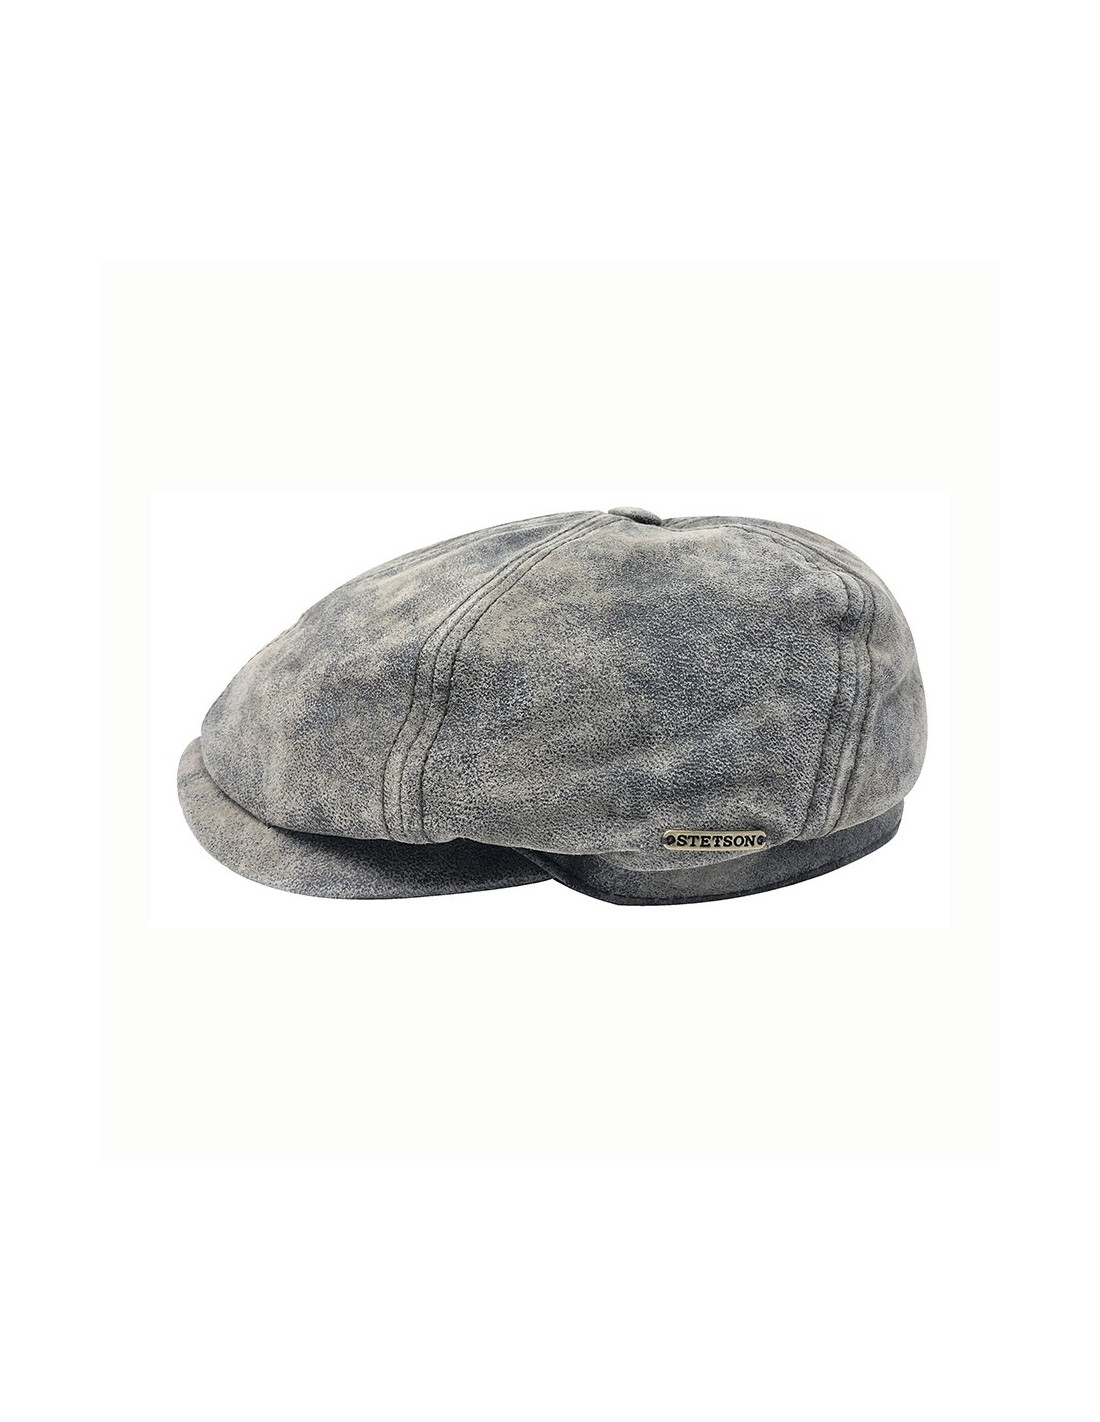 casquette mccook cuir stetson - achat casquette Reference : 2283